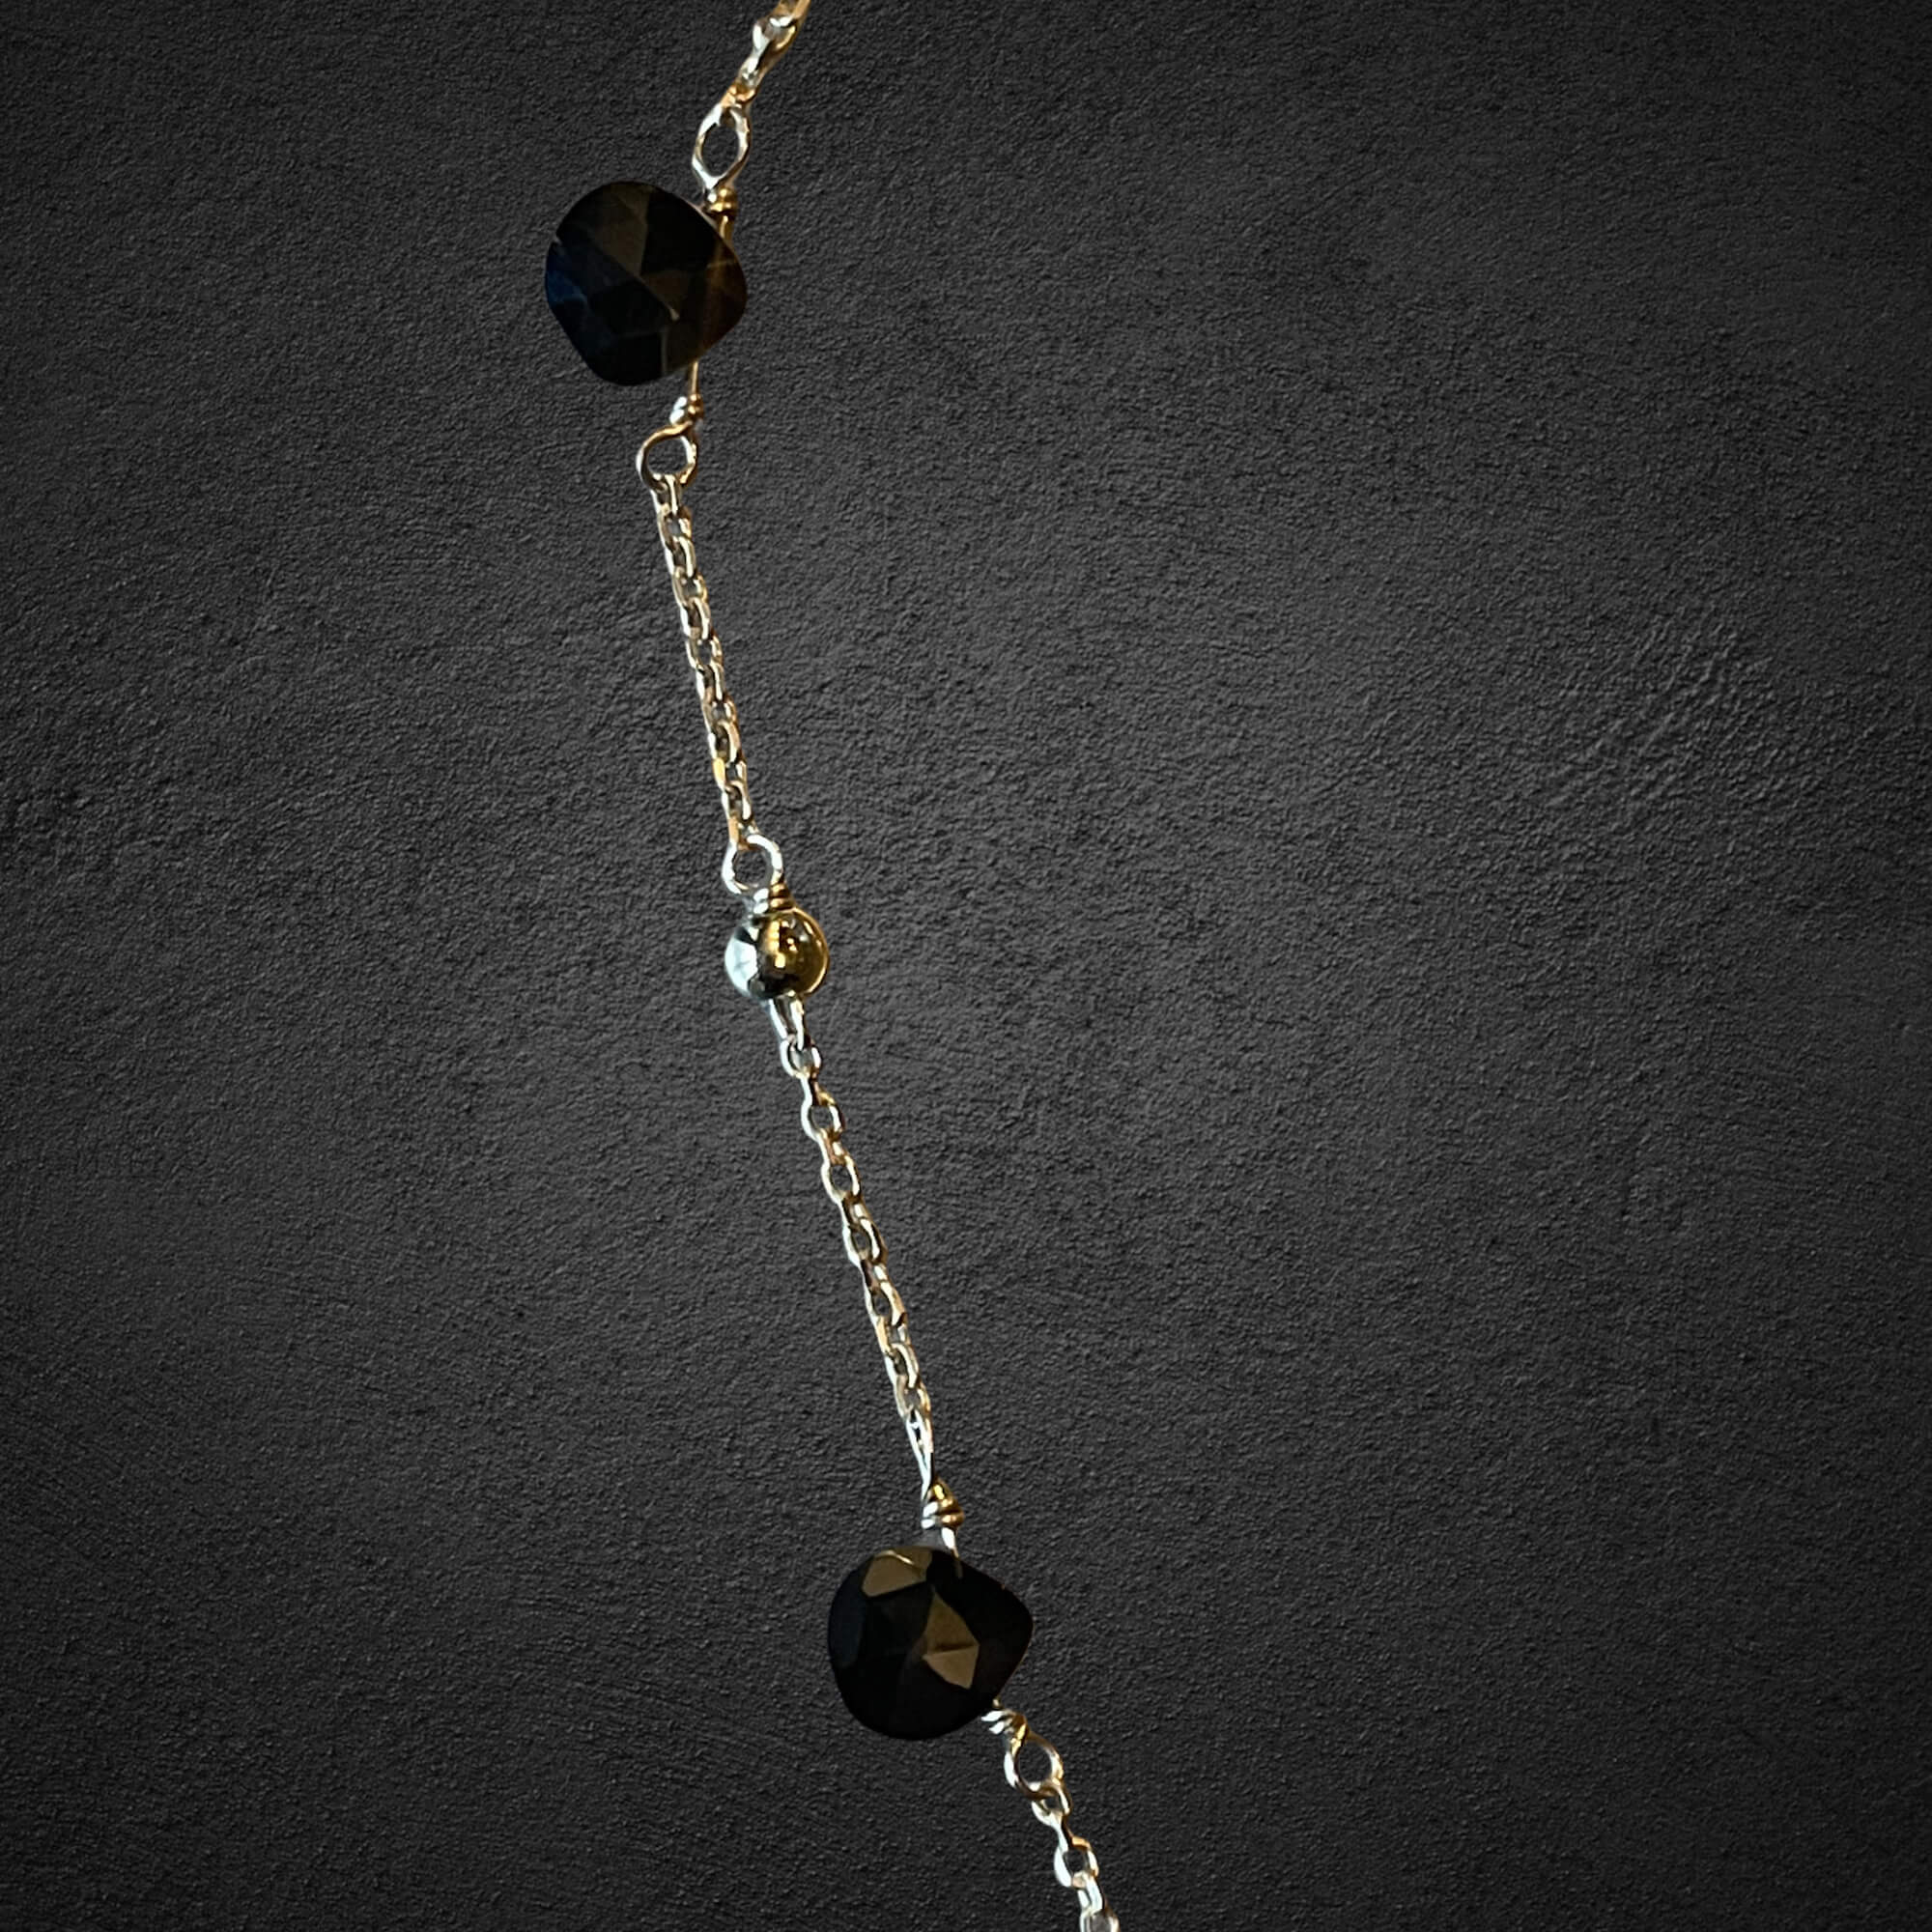 Gilded necklace with onyx stones